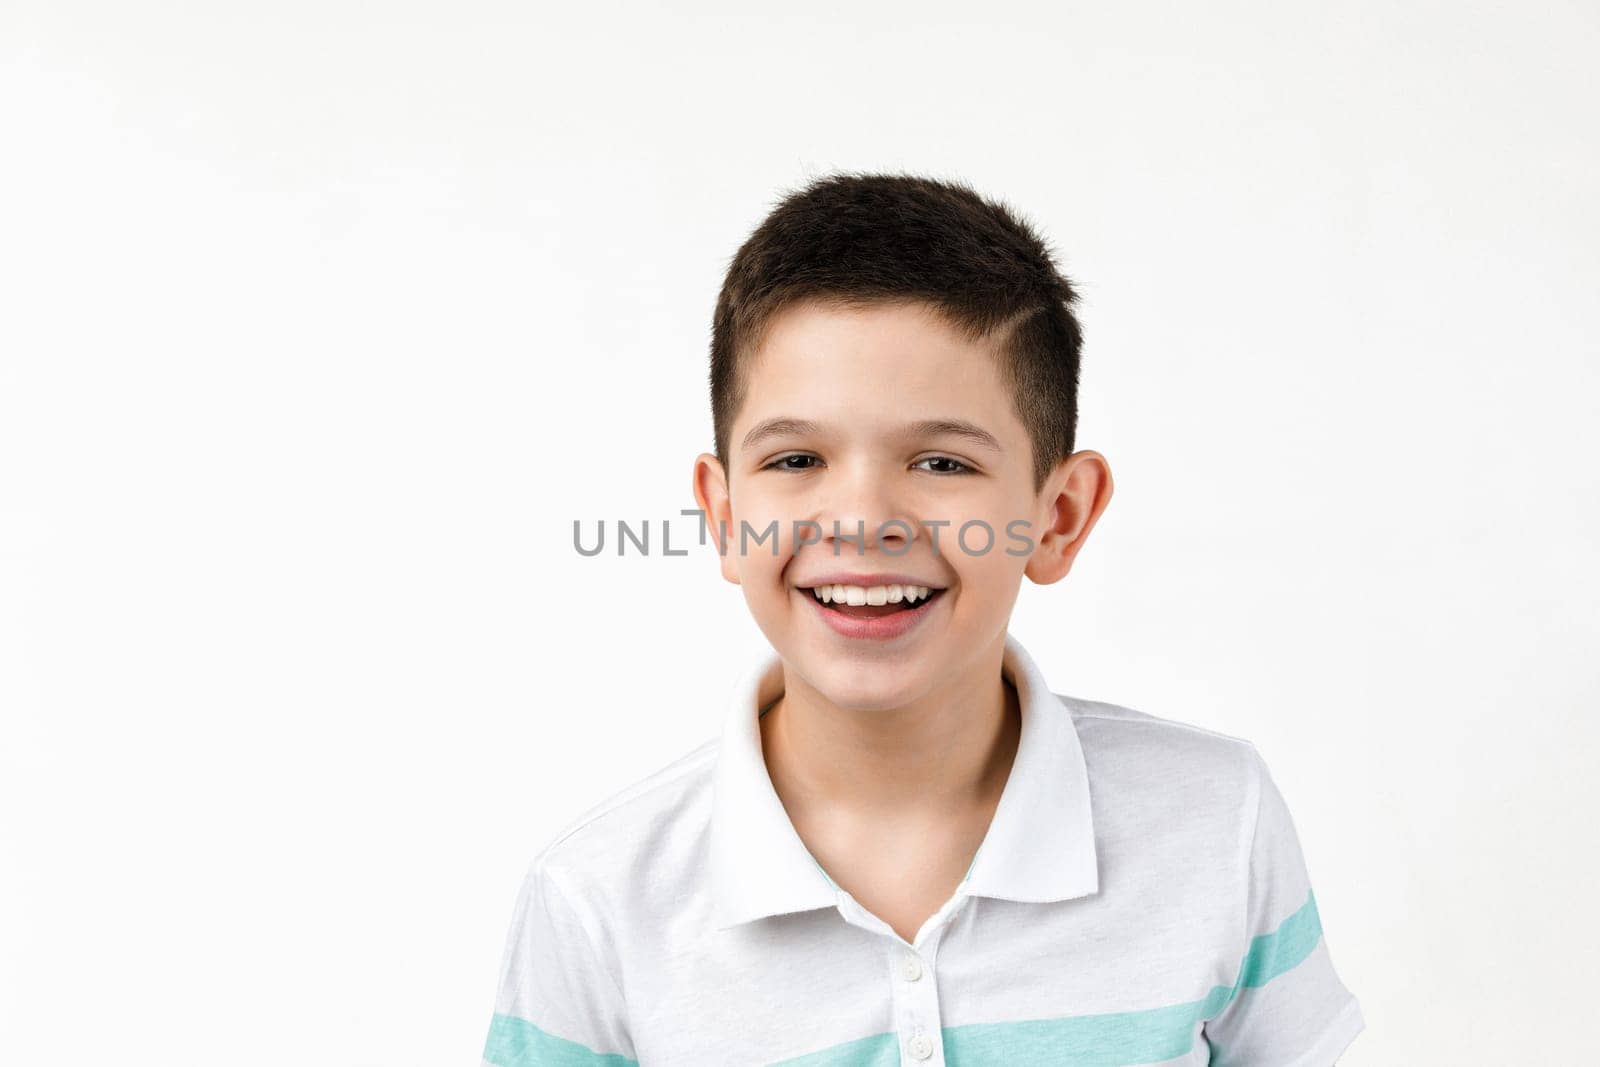 Cute smiling little child boy in t-shirt looking at the camera on white background. Human emotions and facial expression